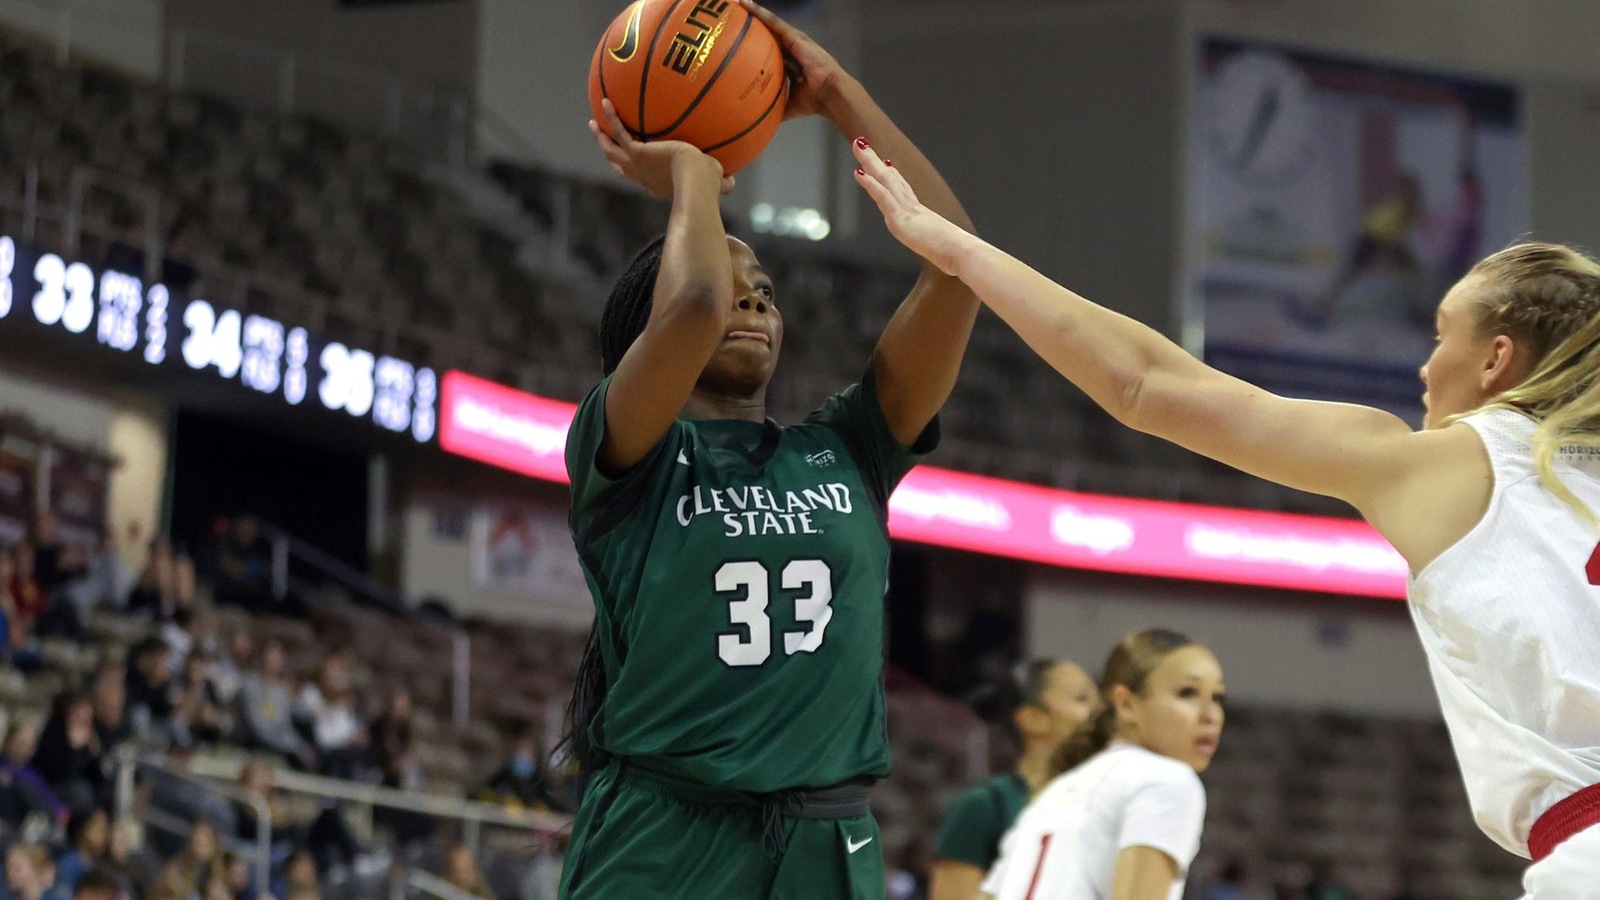 Cleveland State Women’s Basketball Falls To Top-Seeded IUPUI In #HLWBB Championship Game